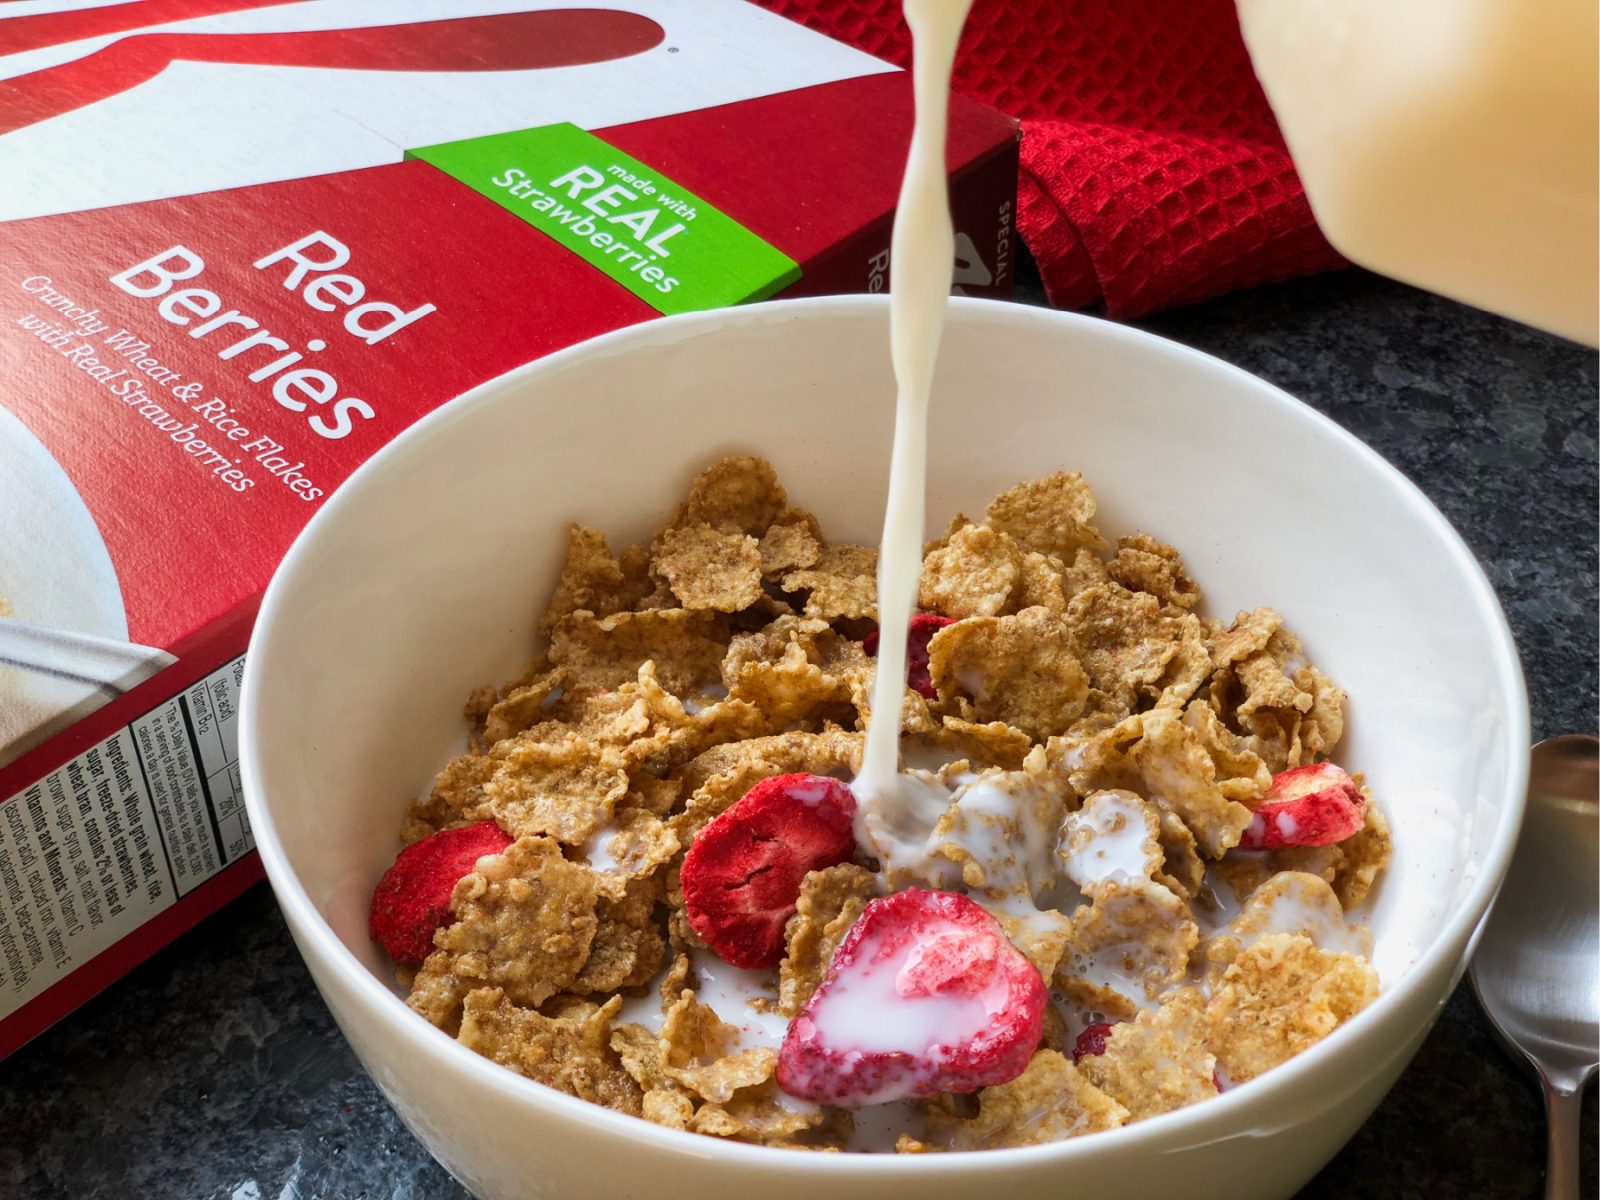 Pick Up Kellogg’s® Special K® Cereals During The Publix BOGO Sale (As Low As 90¢) & Sign Up For The Susan G. Komen Miami/Fort Lauderdale Virtual More Thank Pink Walk